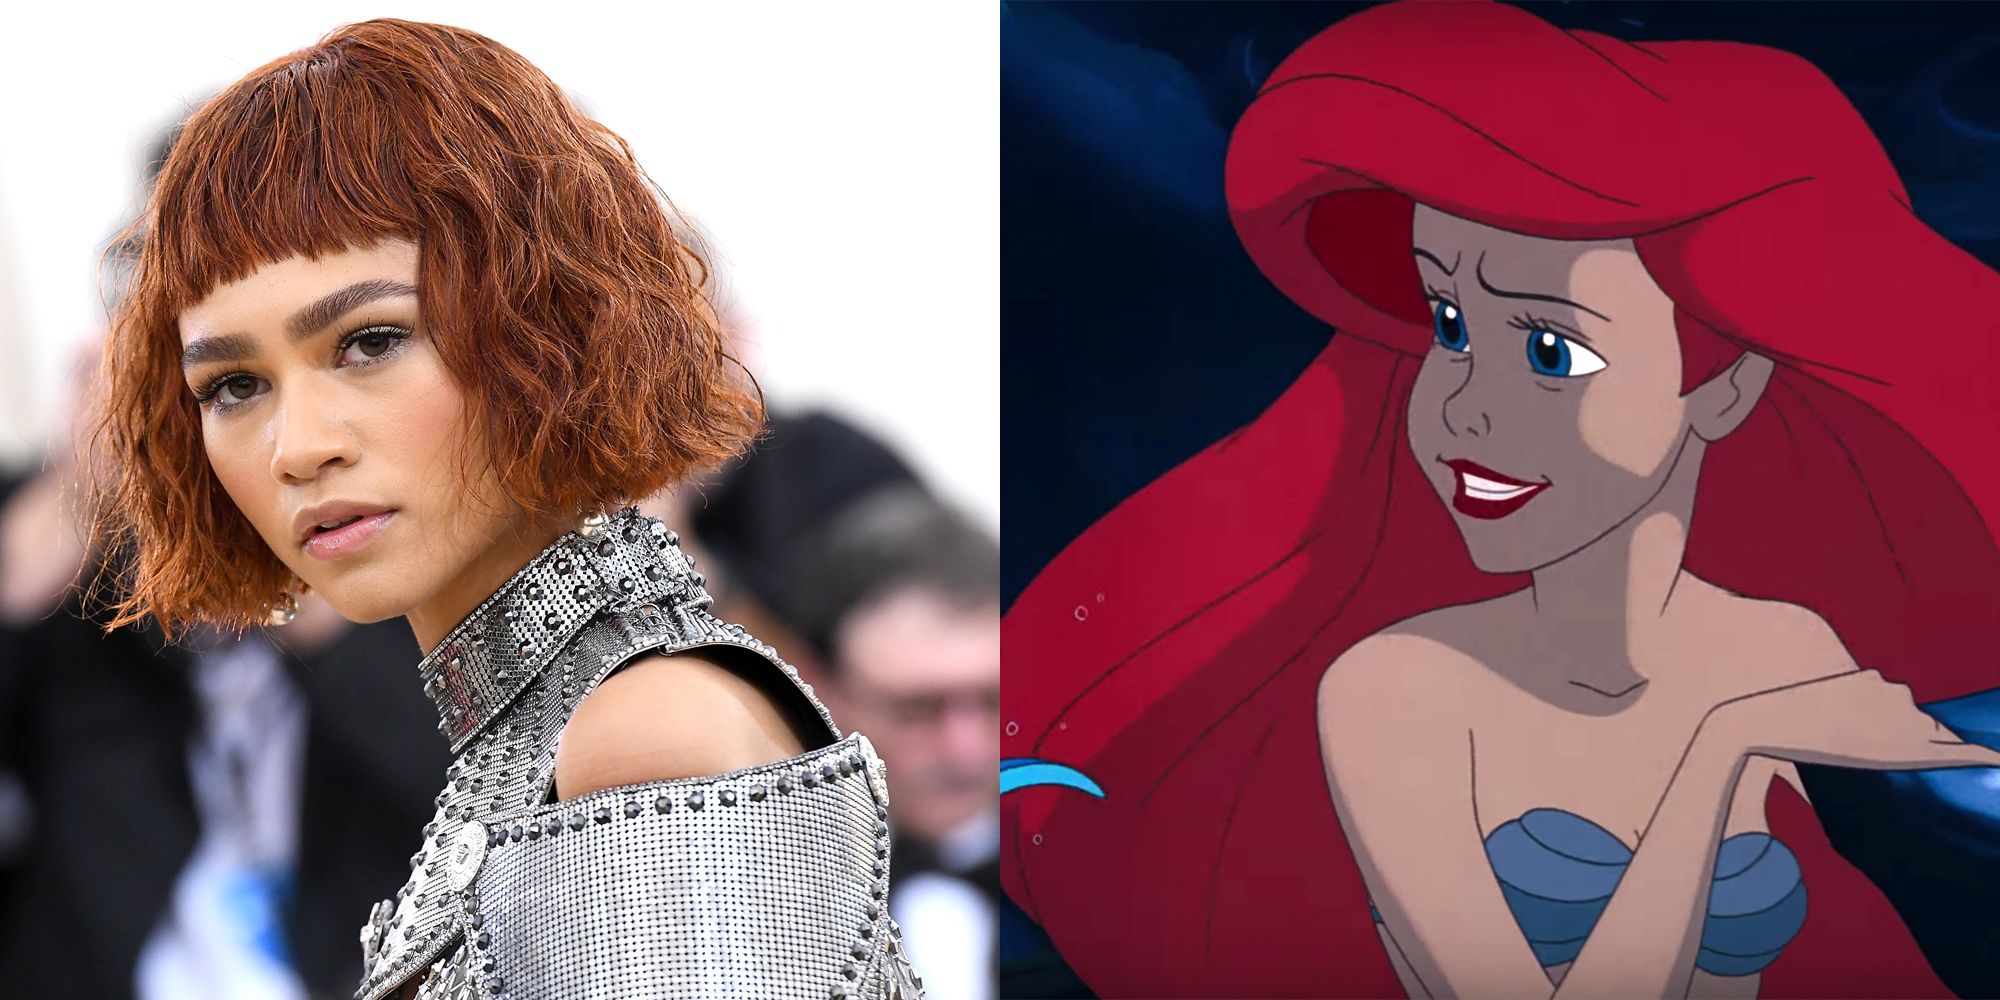 Zendaya Coleman Rumored To Be Offered Ariel Role In Disney'S Live-Action  'The Little Mermaid'